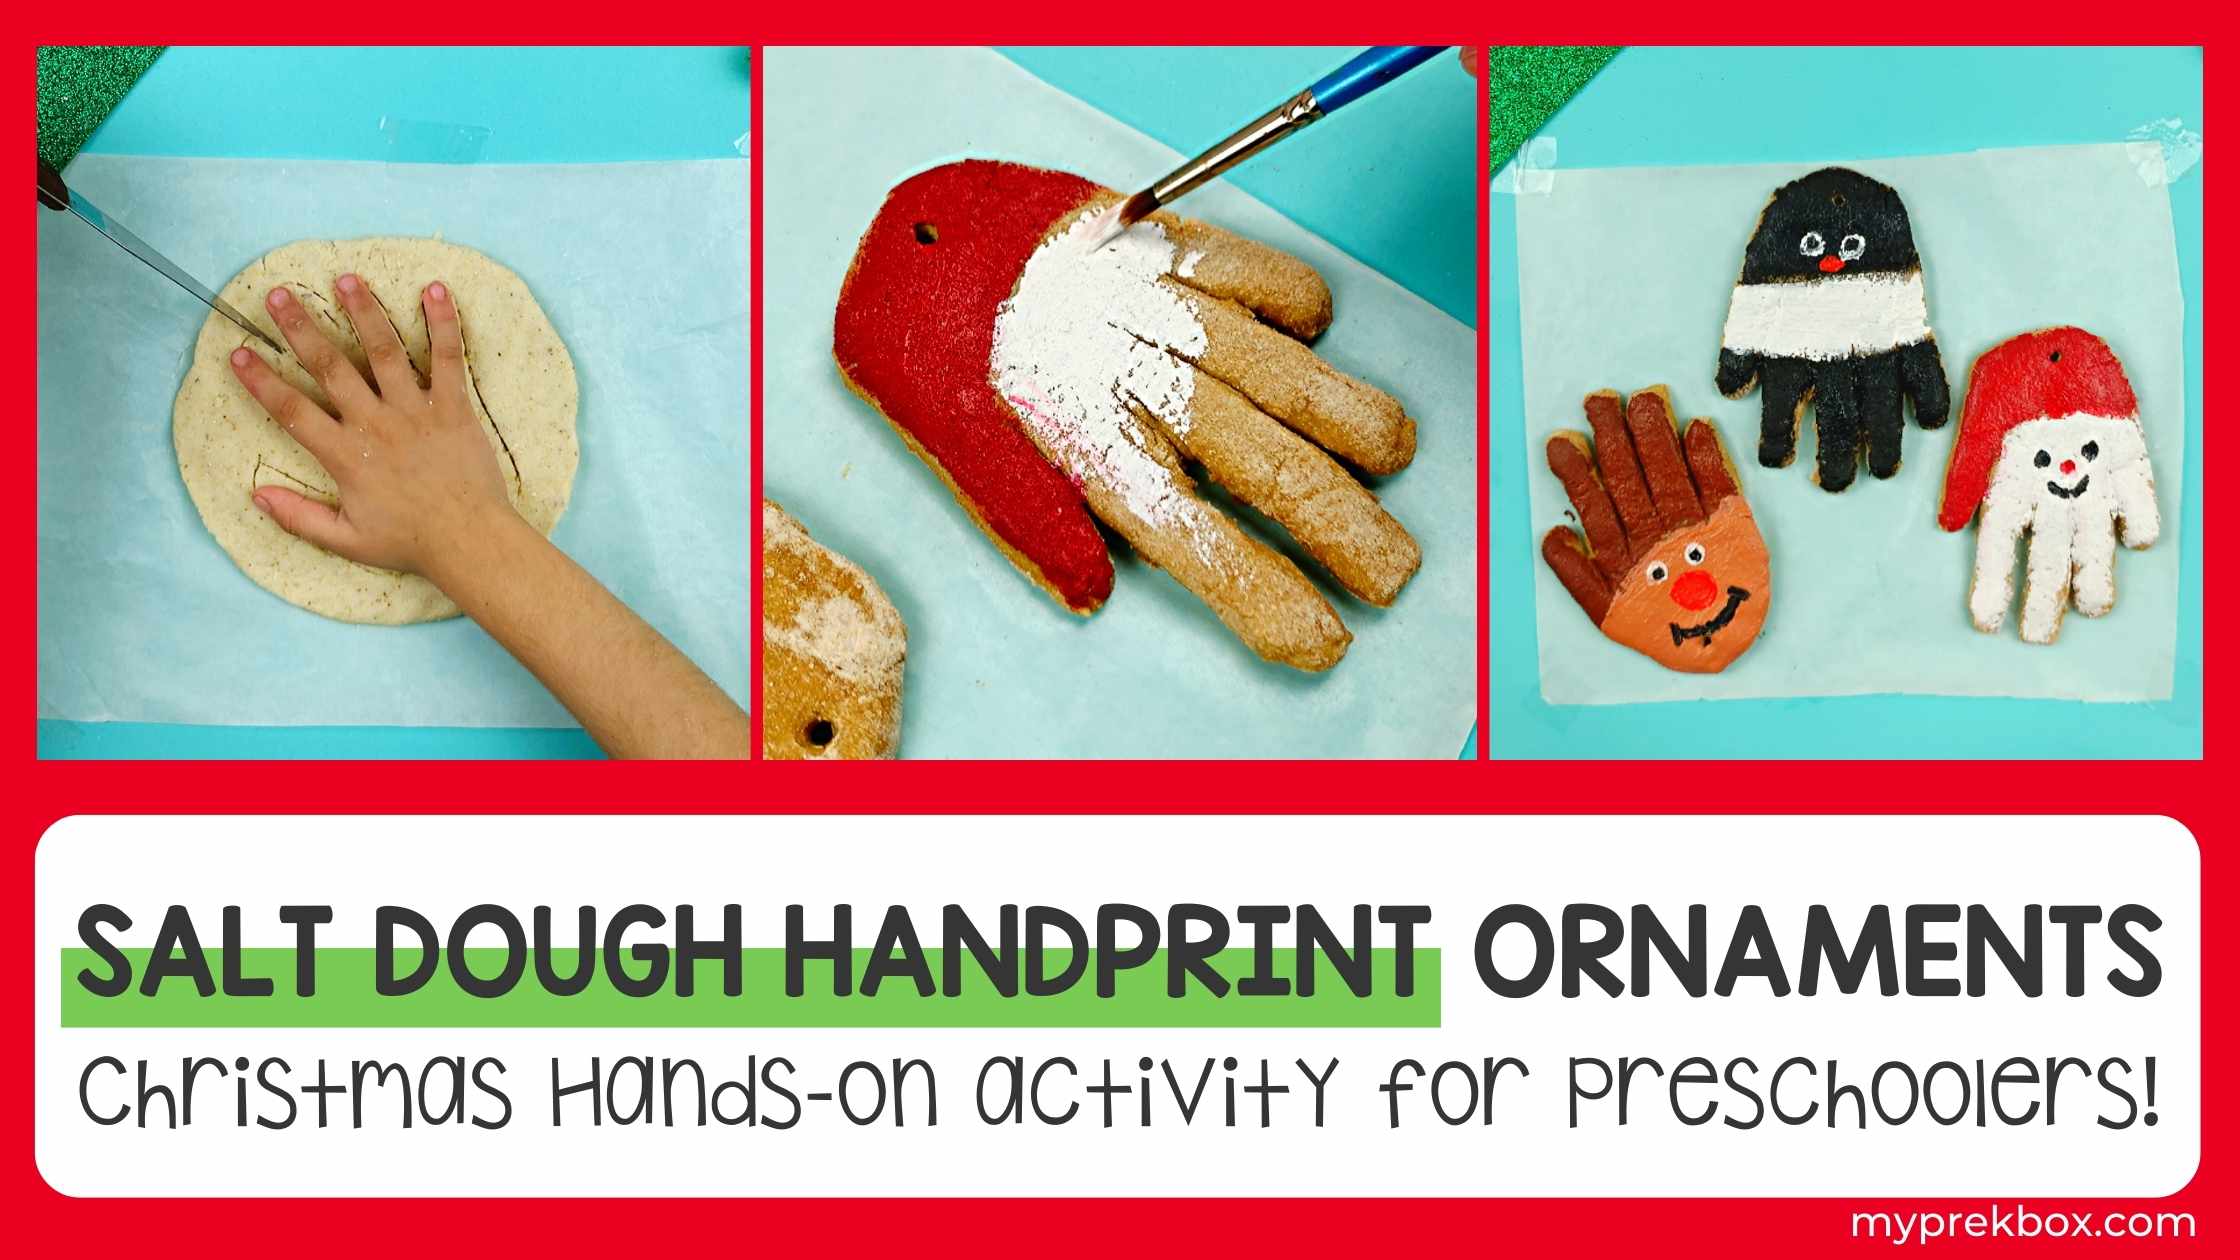 DIY Puffy Paint for Winter Crafts